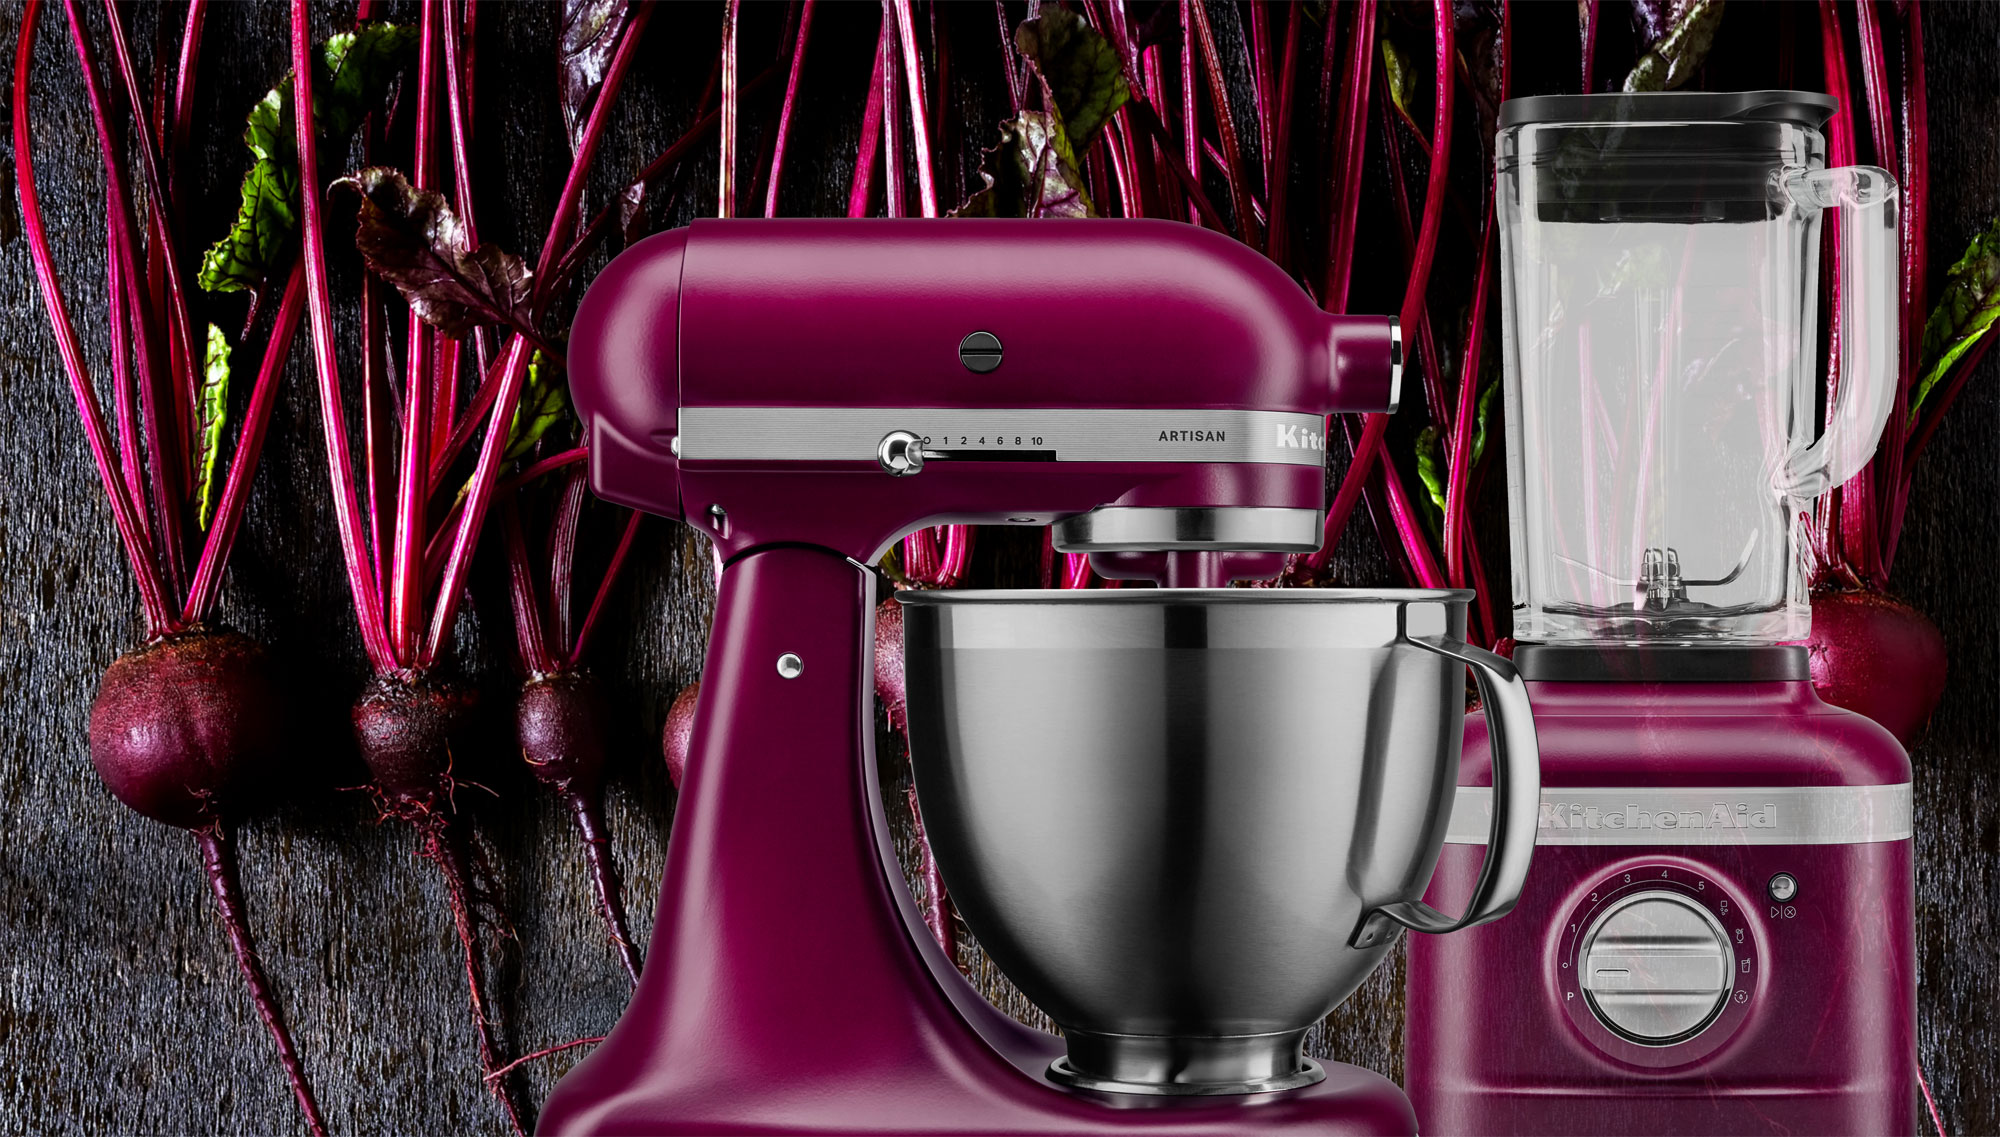 A Gorgeous Beetroot KitchenAid\'s Is Of For Year 2022 The Colour